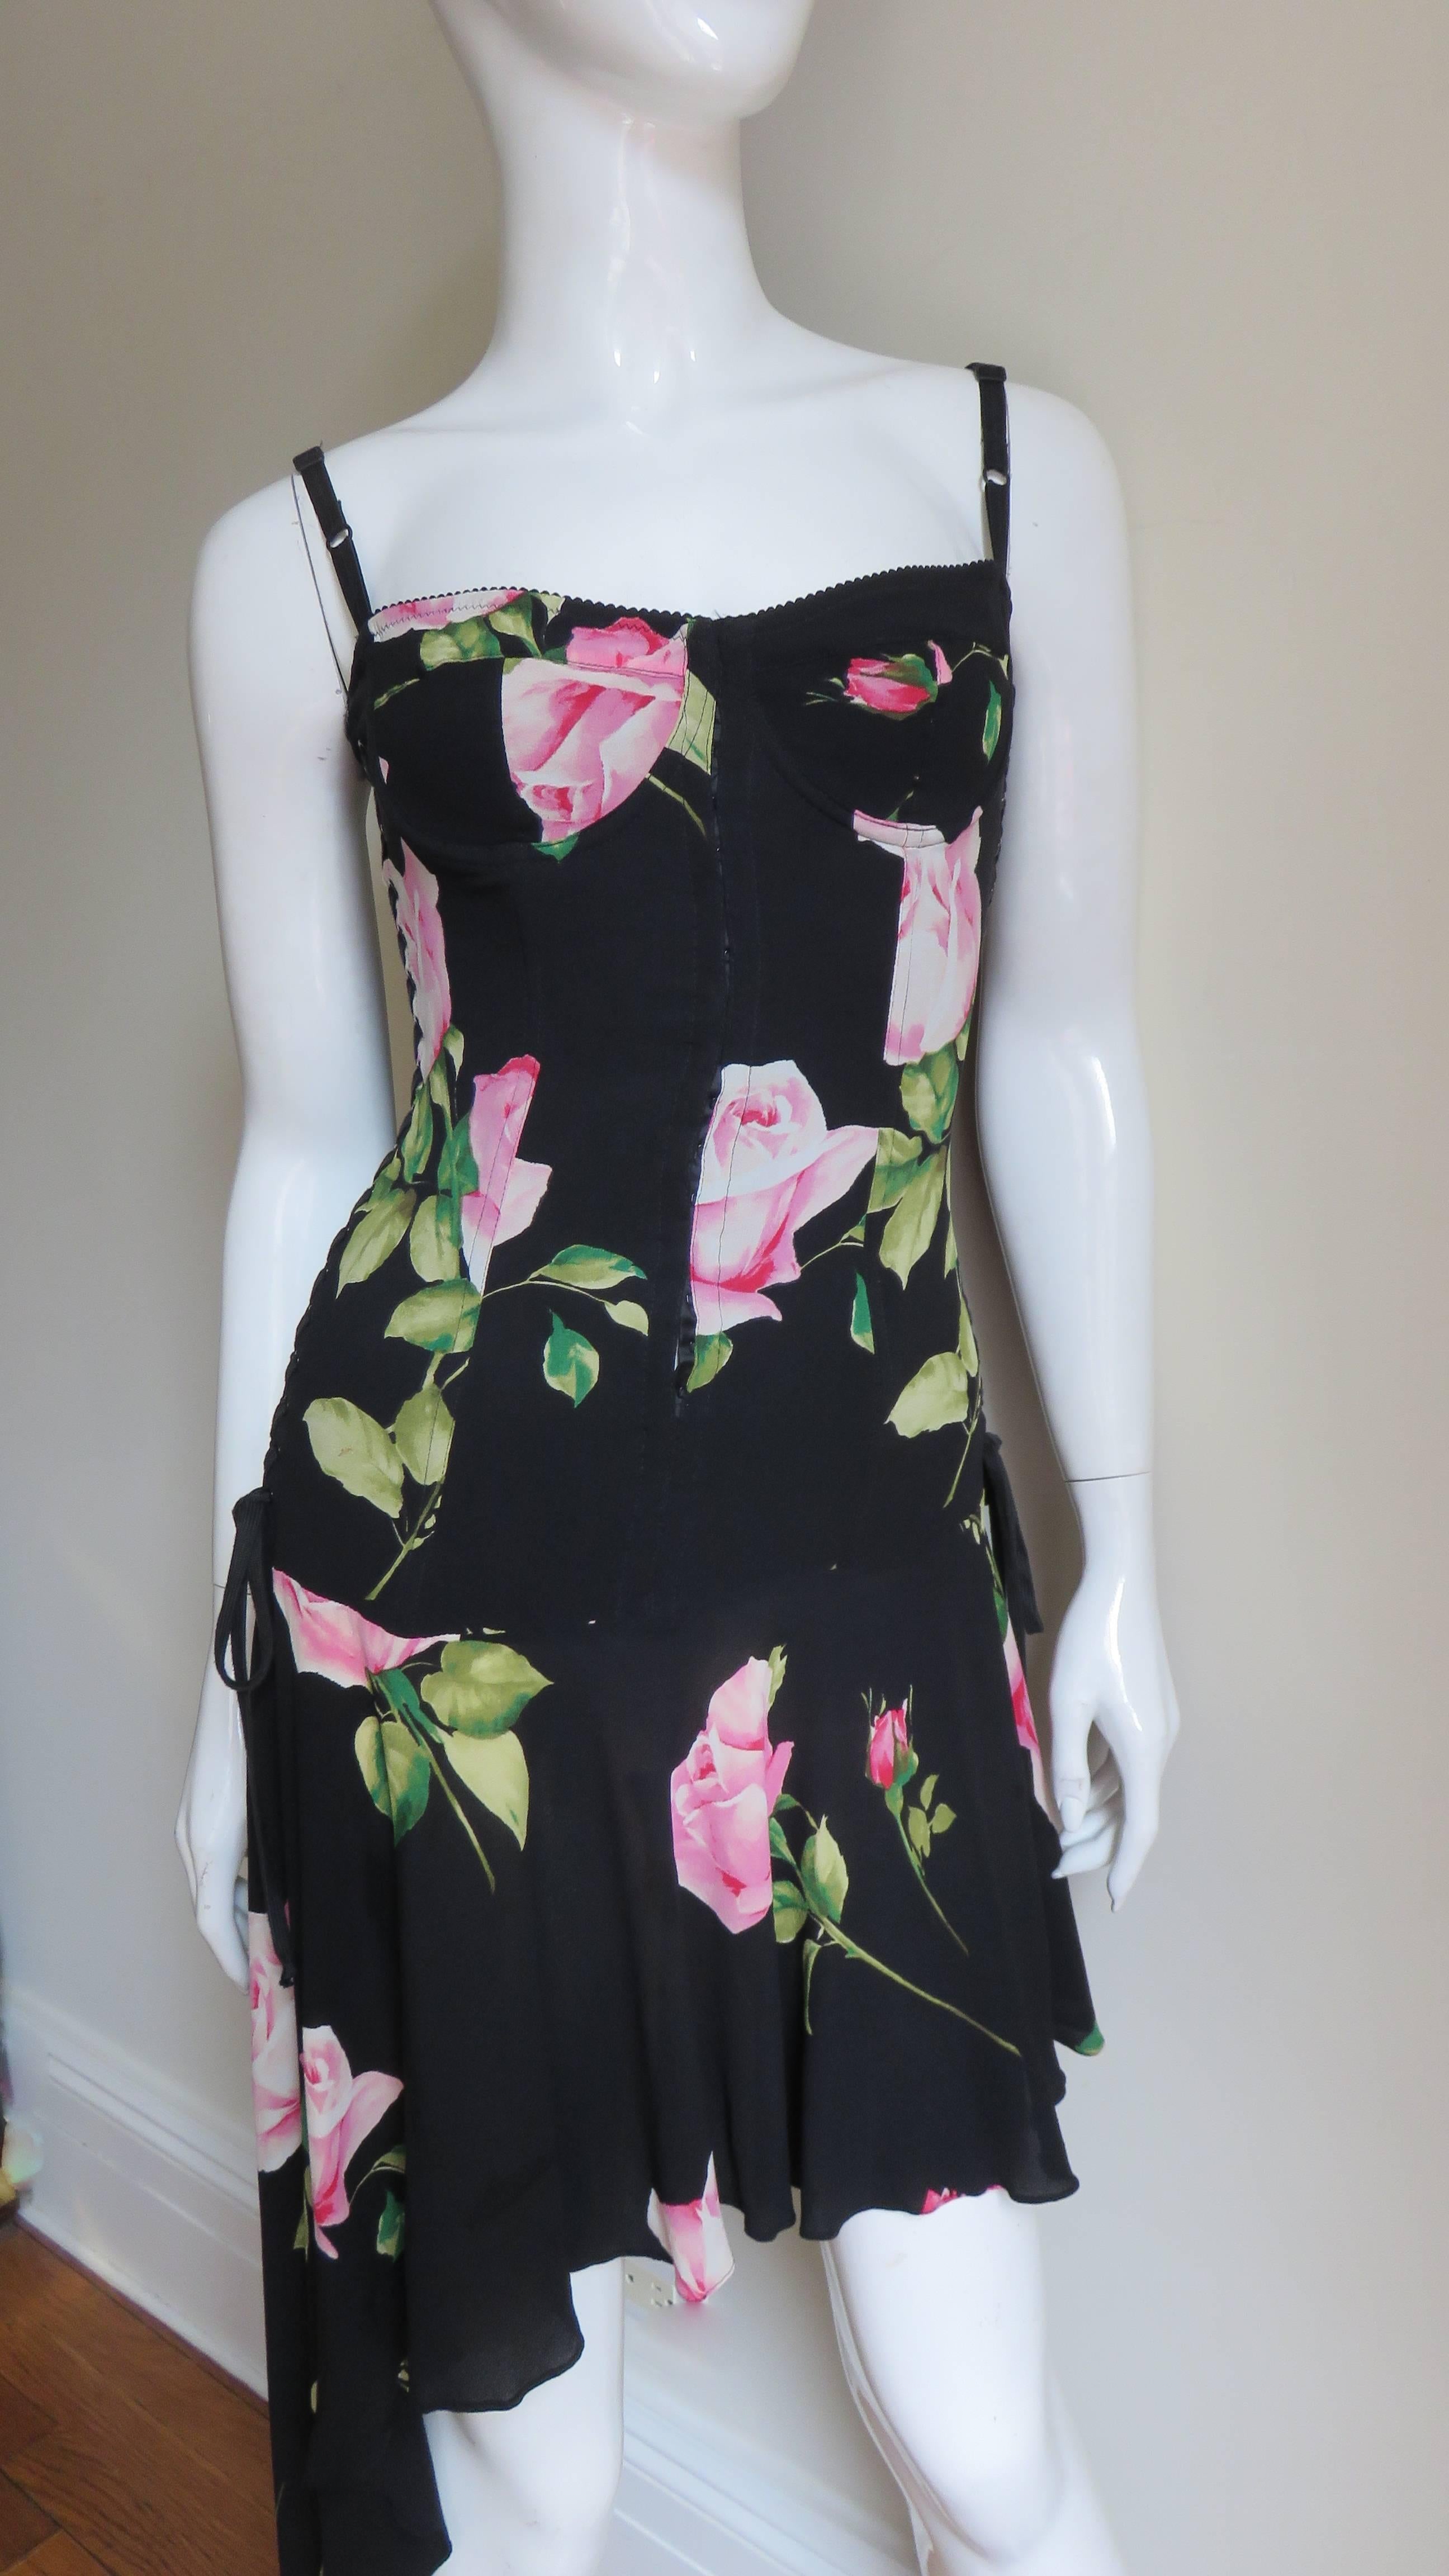 A beautiful pink roses on a black background stretch silk dress by Dolce & Gabbana.  It has an inner fitted, boned, hip length bodice with functional lacing along both sides attaching to an asymmetrical skirt longer on one side. It has a back